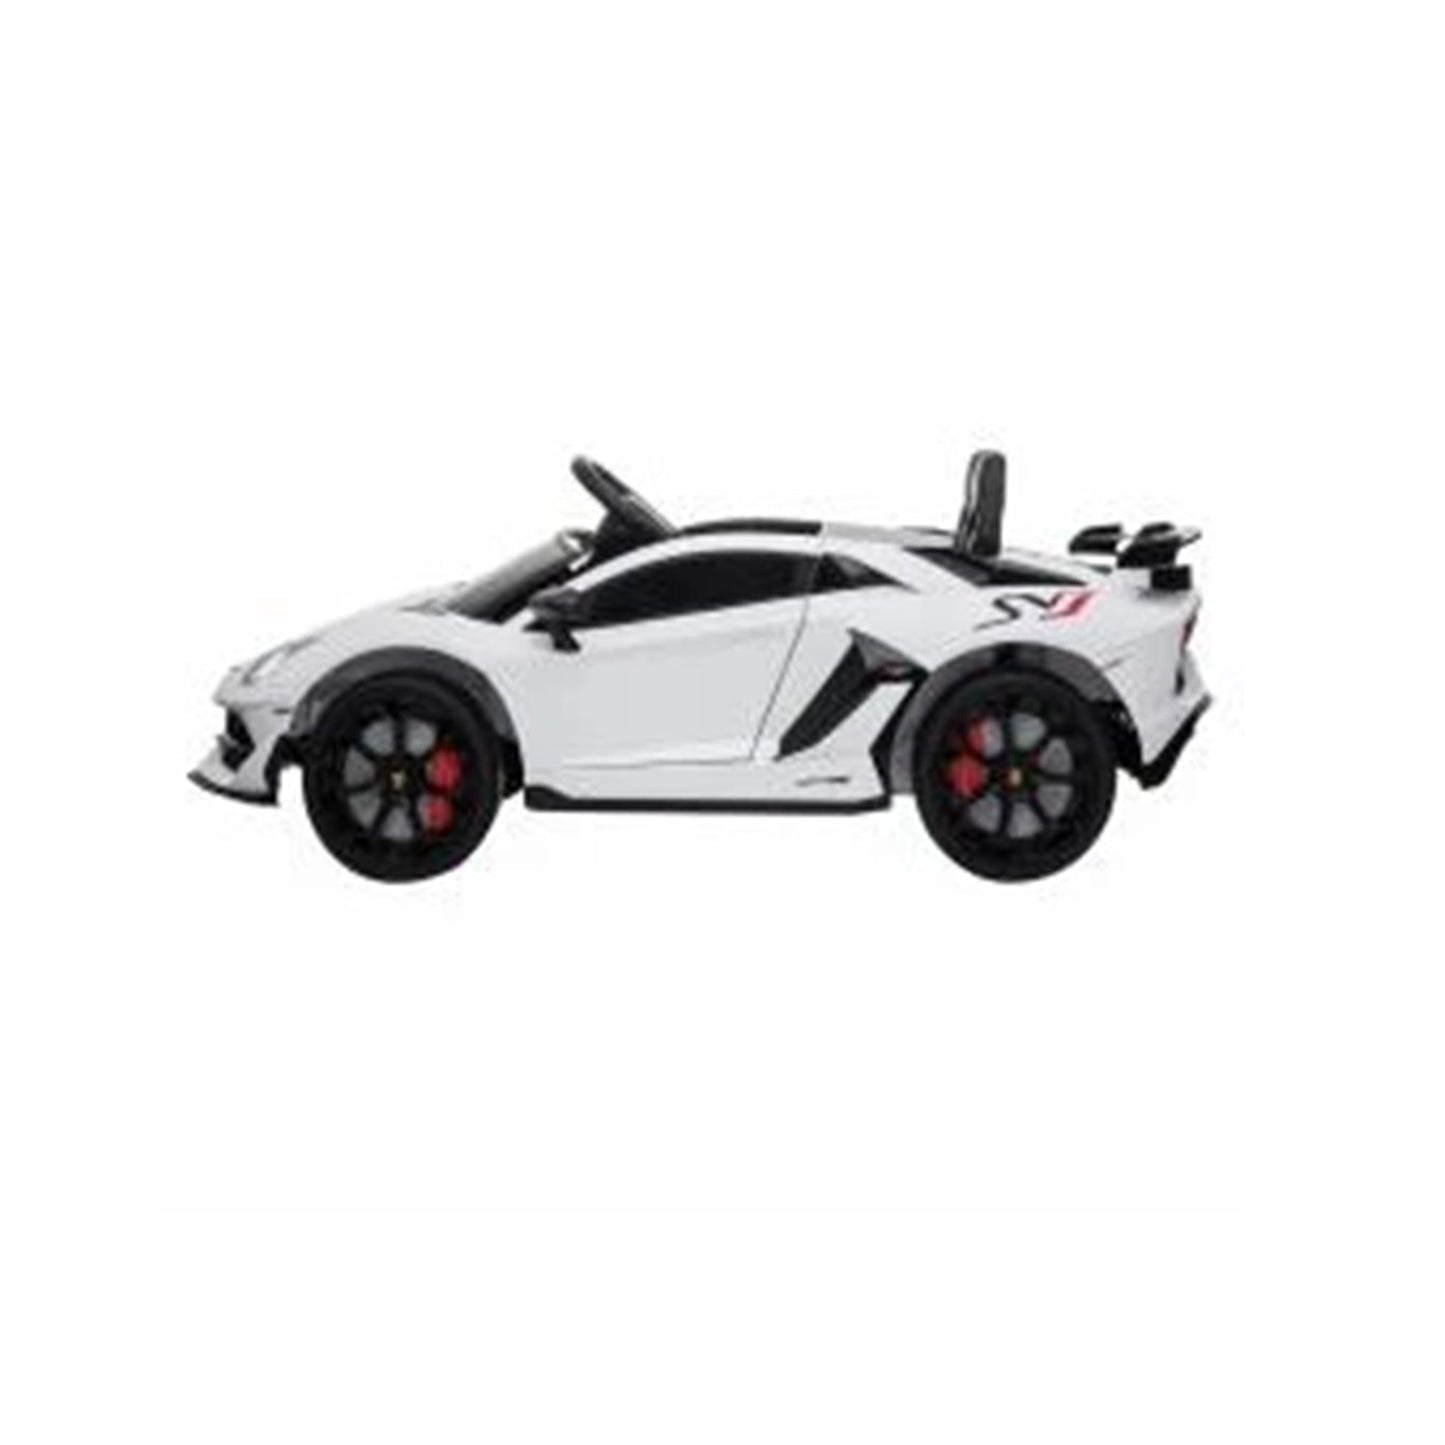 "White Lamborghini SVJ 12V Electric Kids Ride-On with parent remote control from our store."